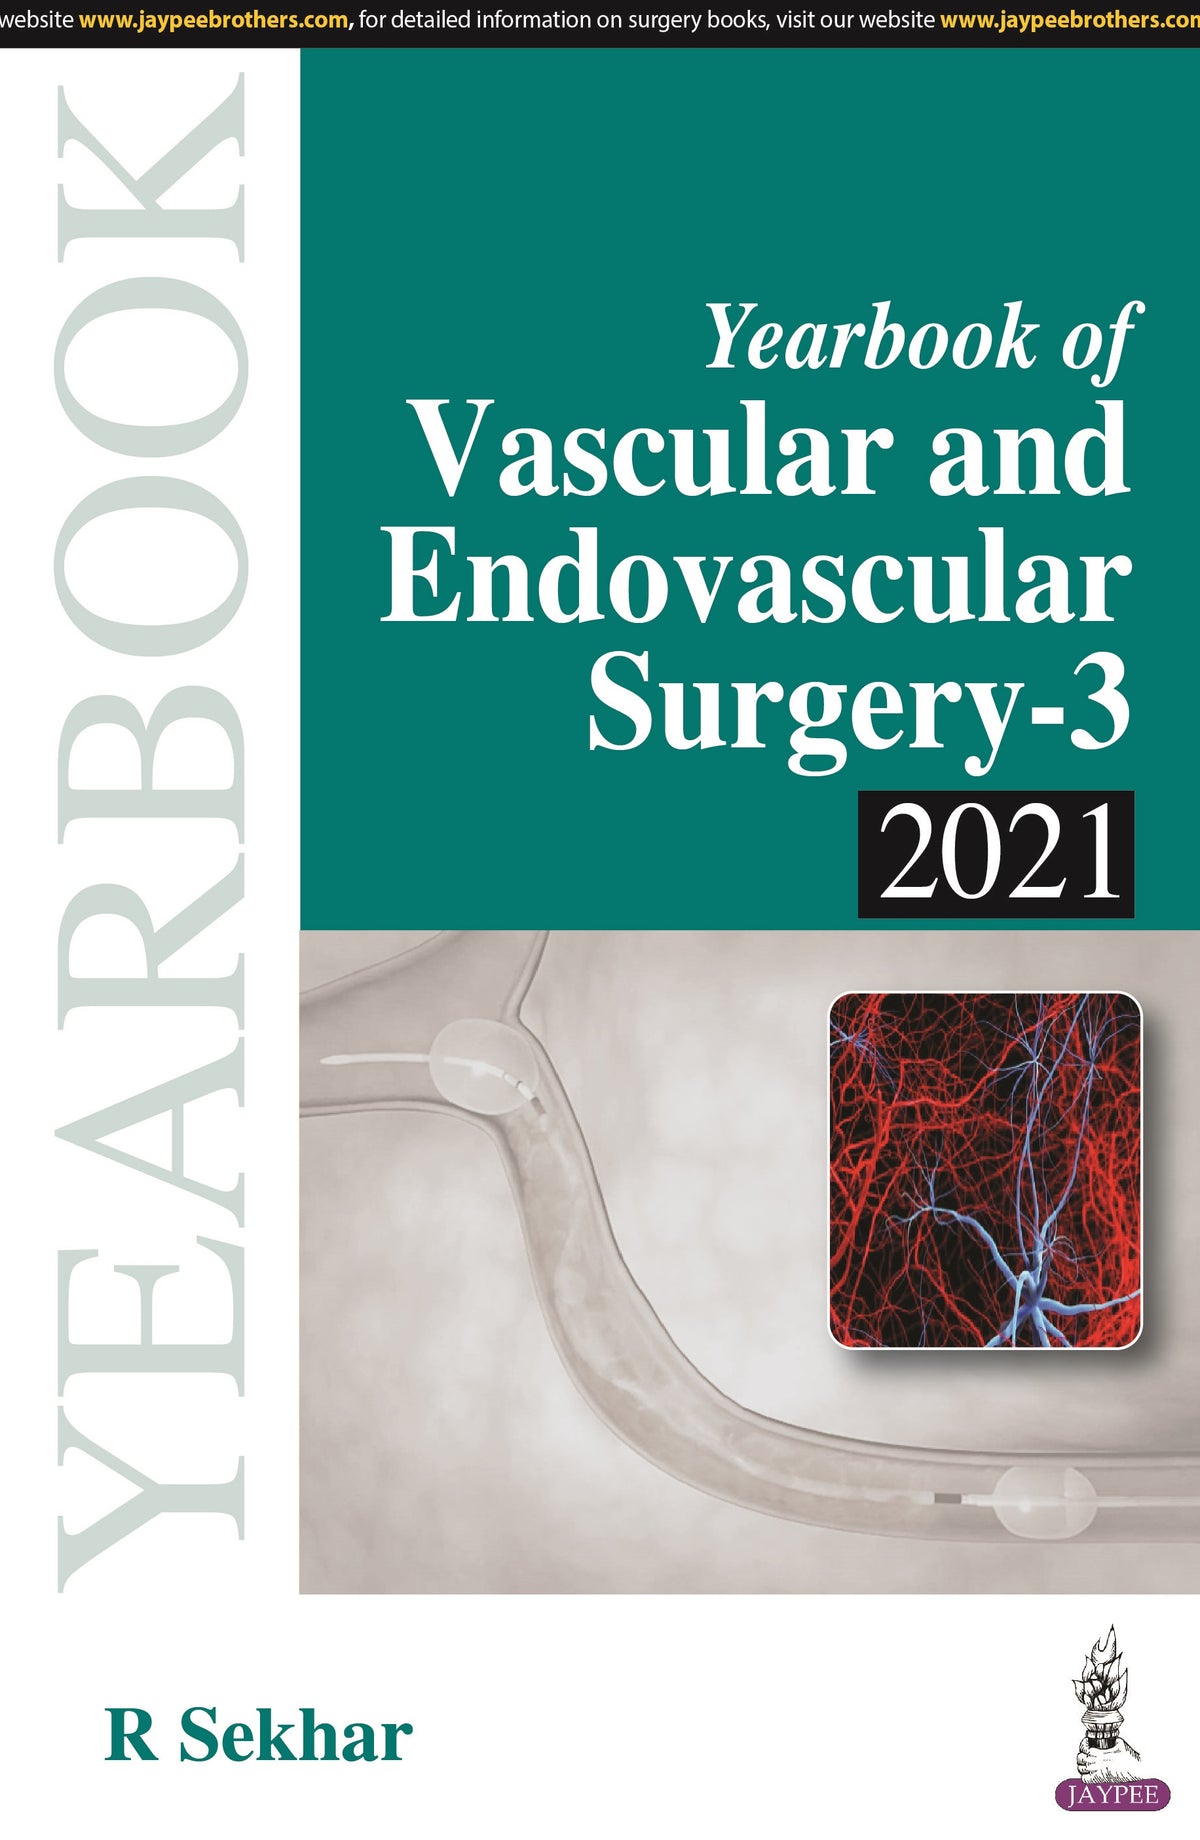 YEARBOOK OF VASCULAR AND ENDOVASCULAR SURGERY-3 2021,1/E,R SEKHAR